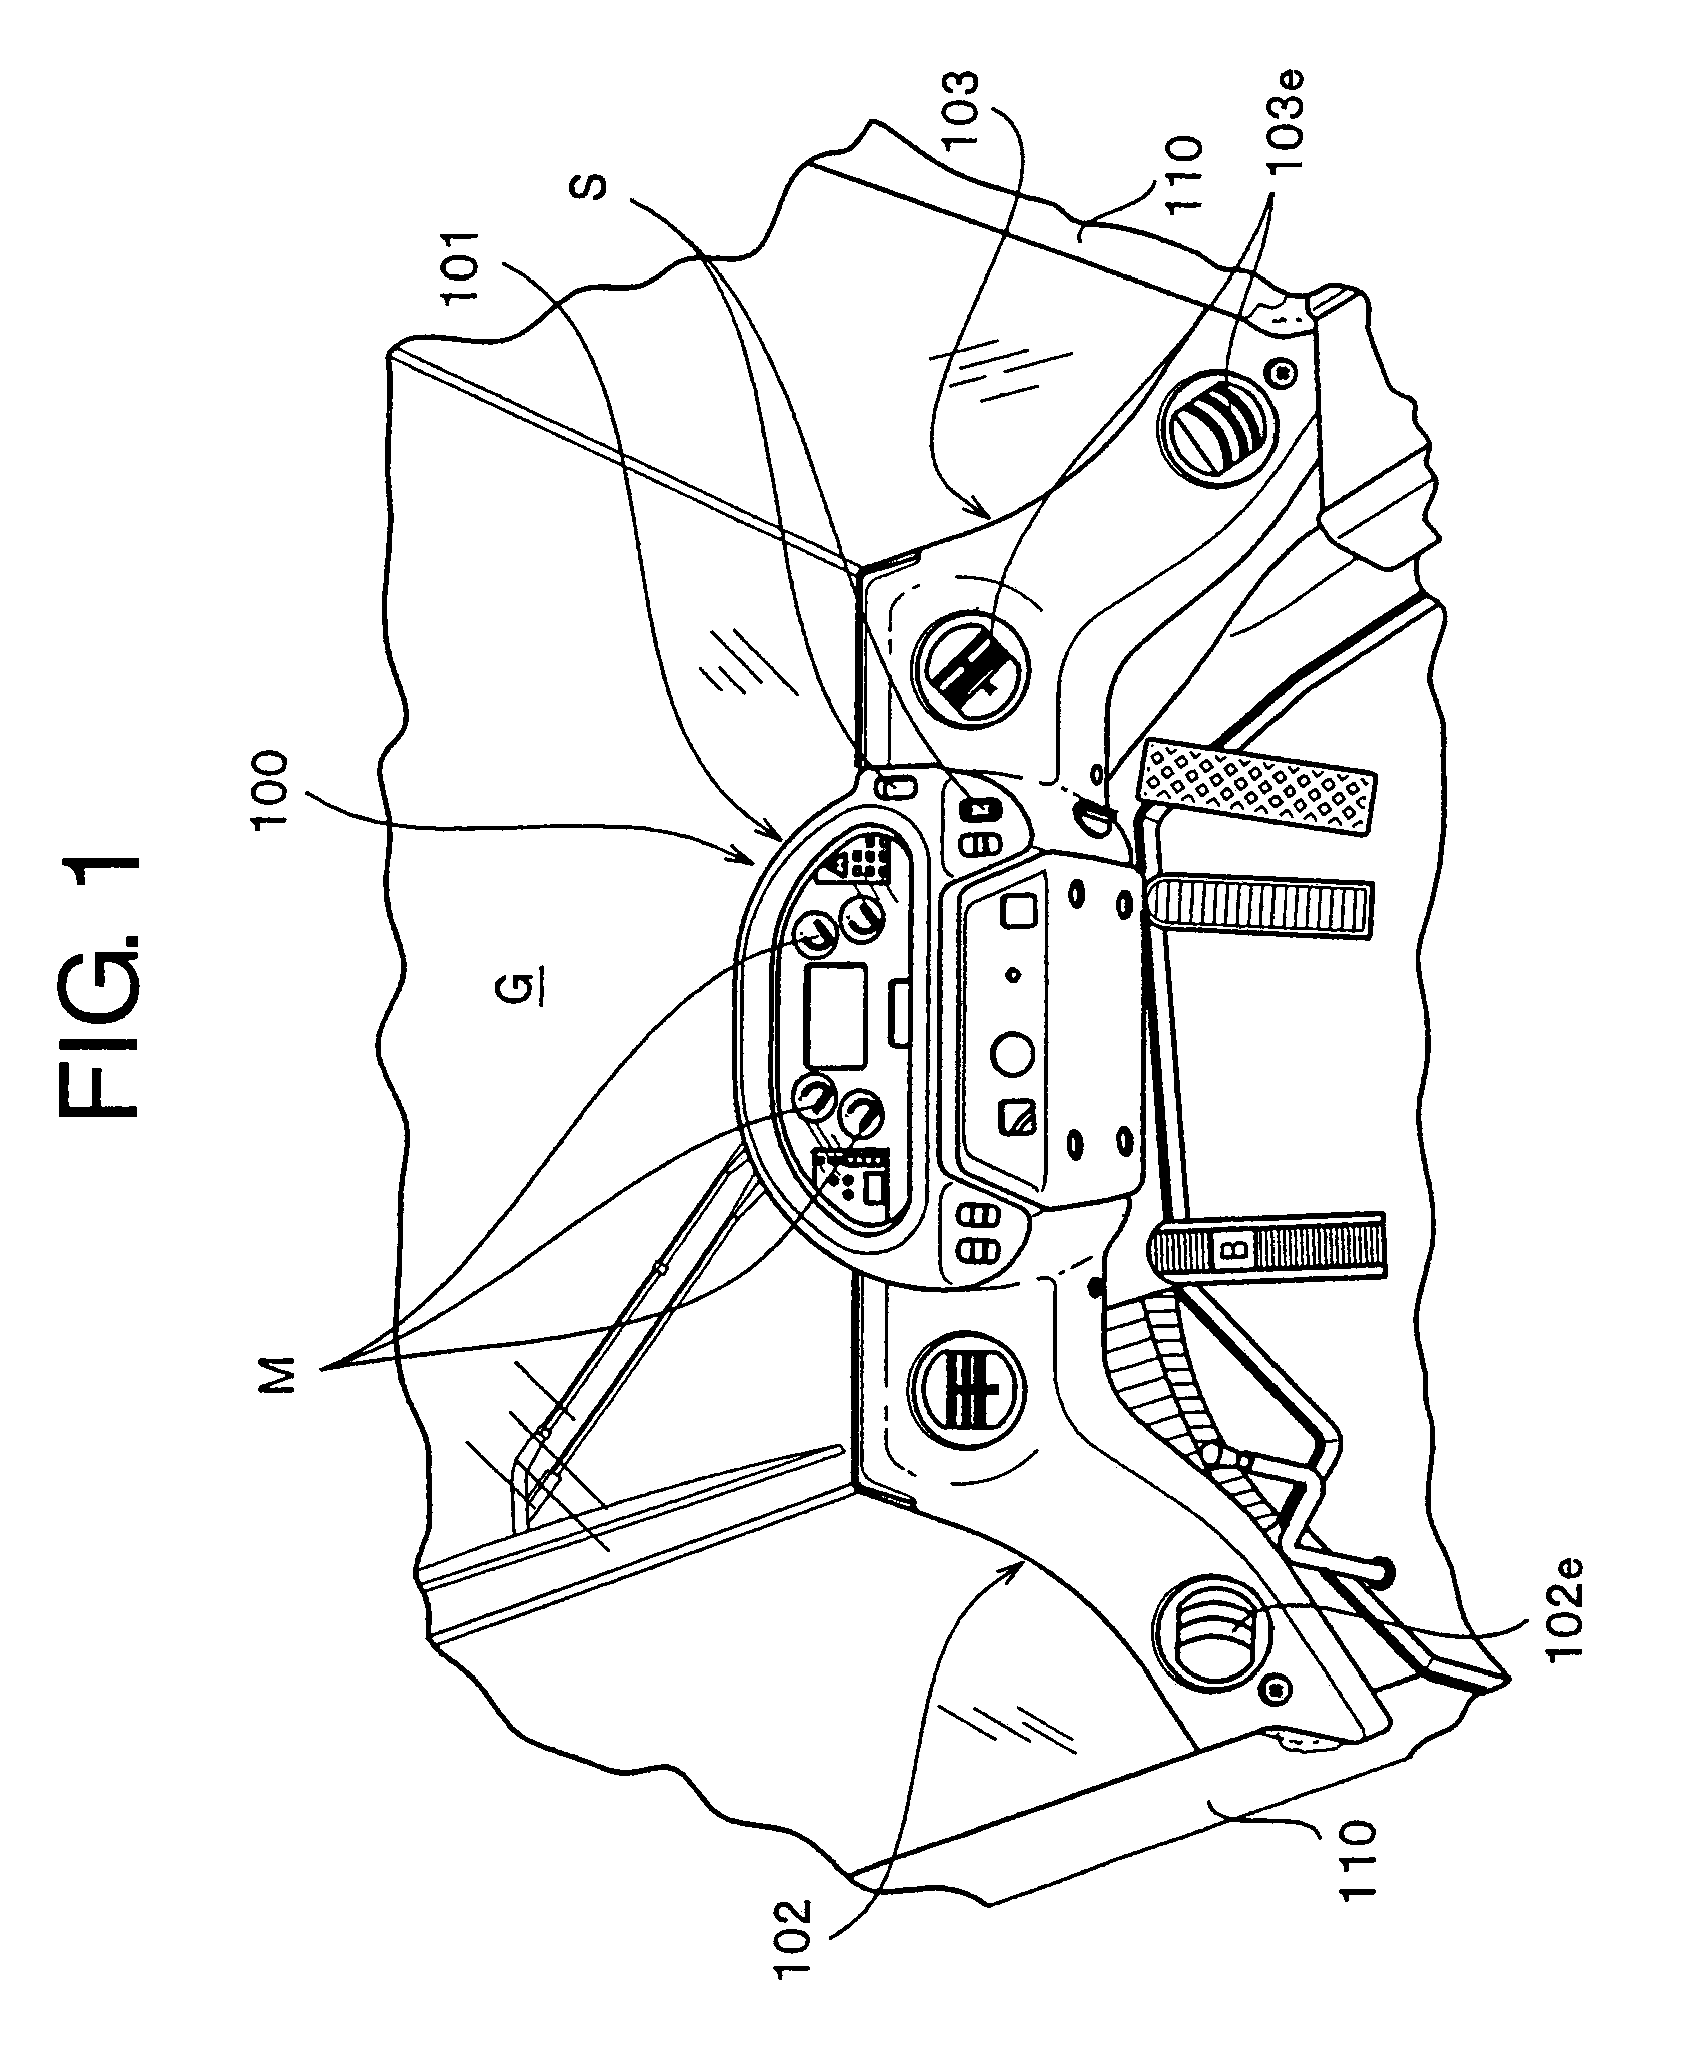 Interior trim member of work vehicle and method of manufacturing the same